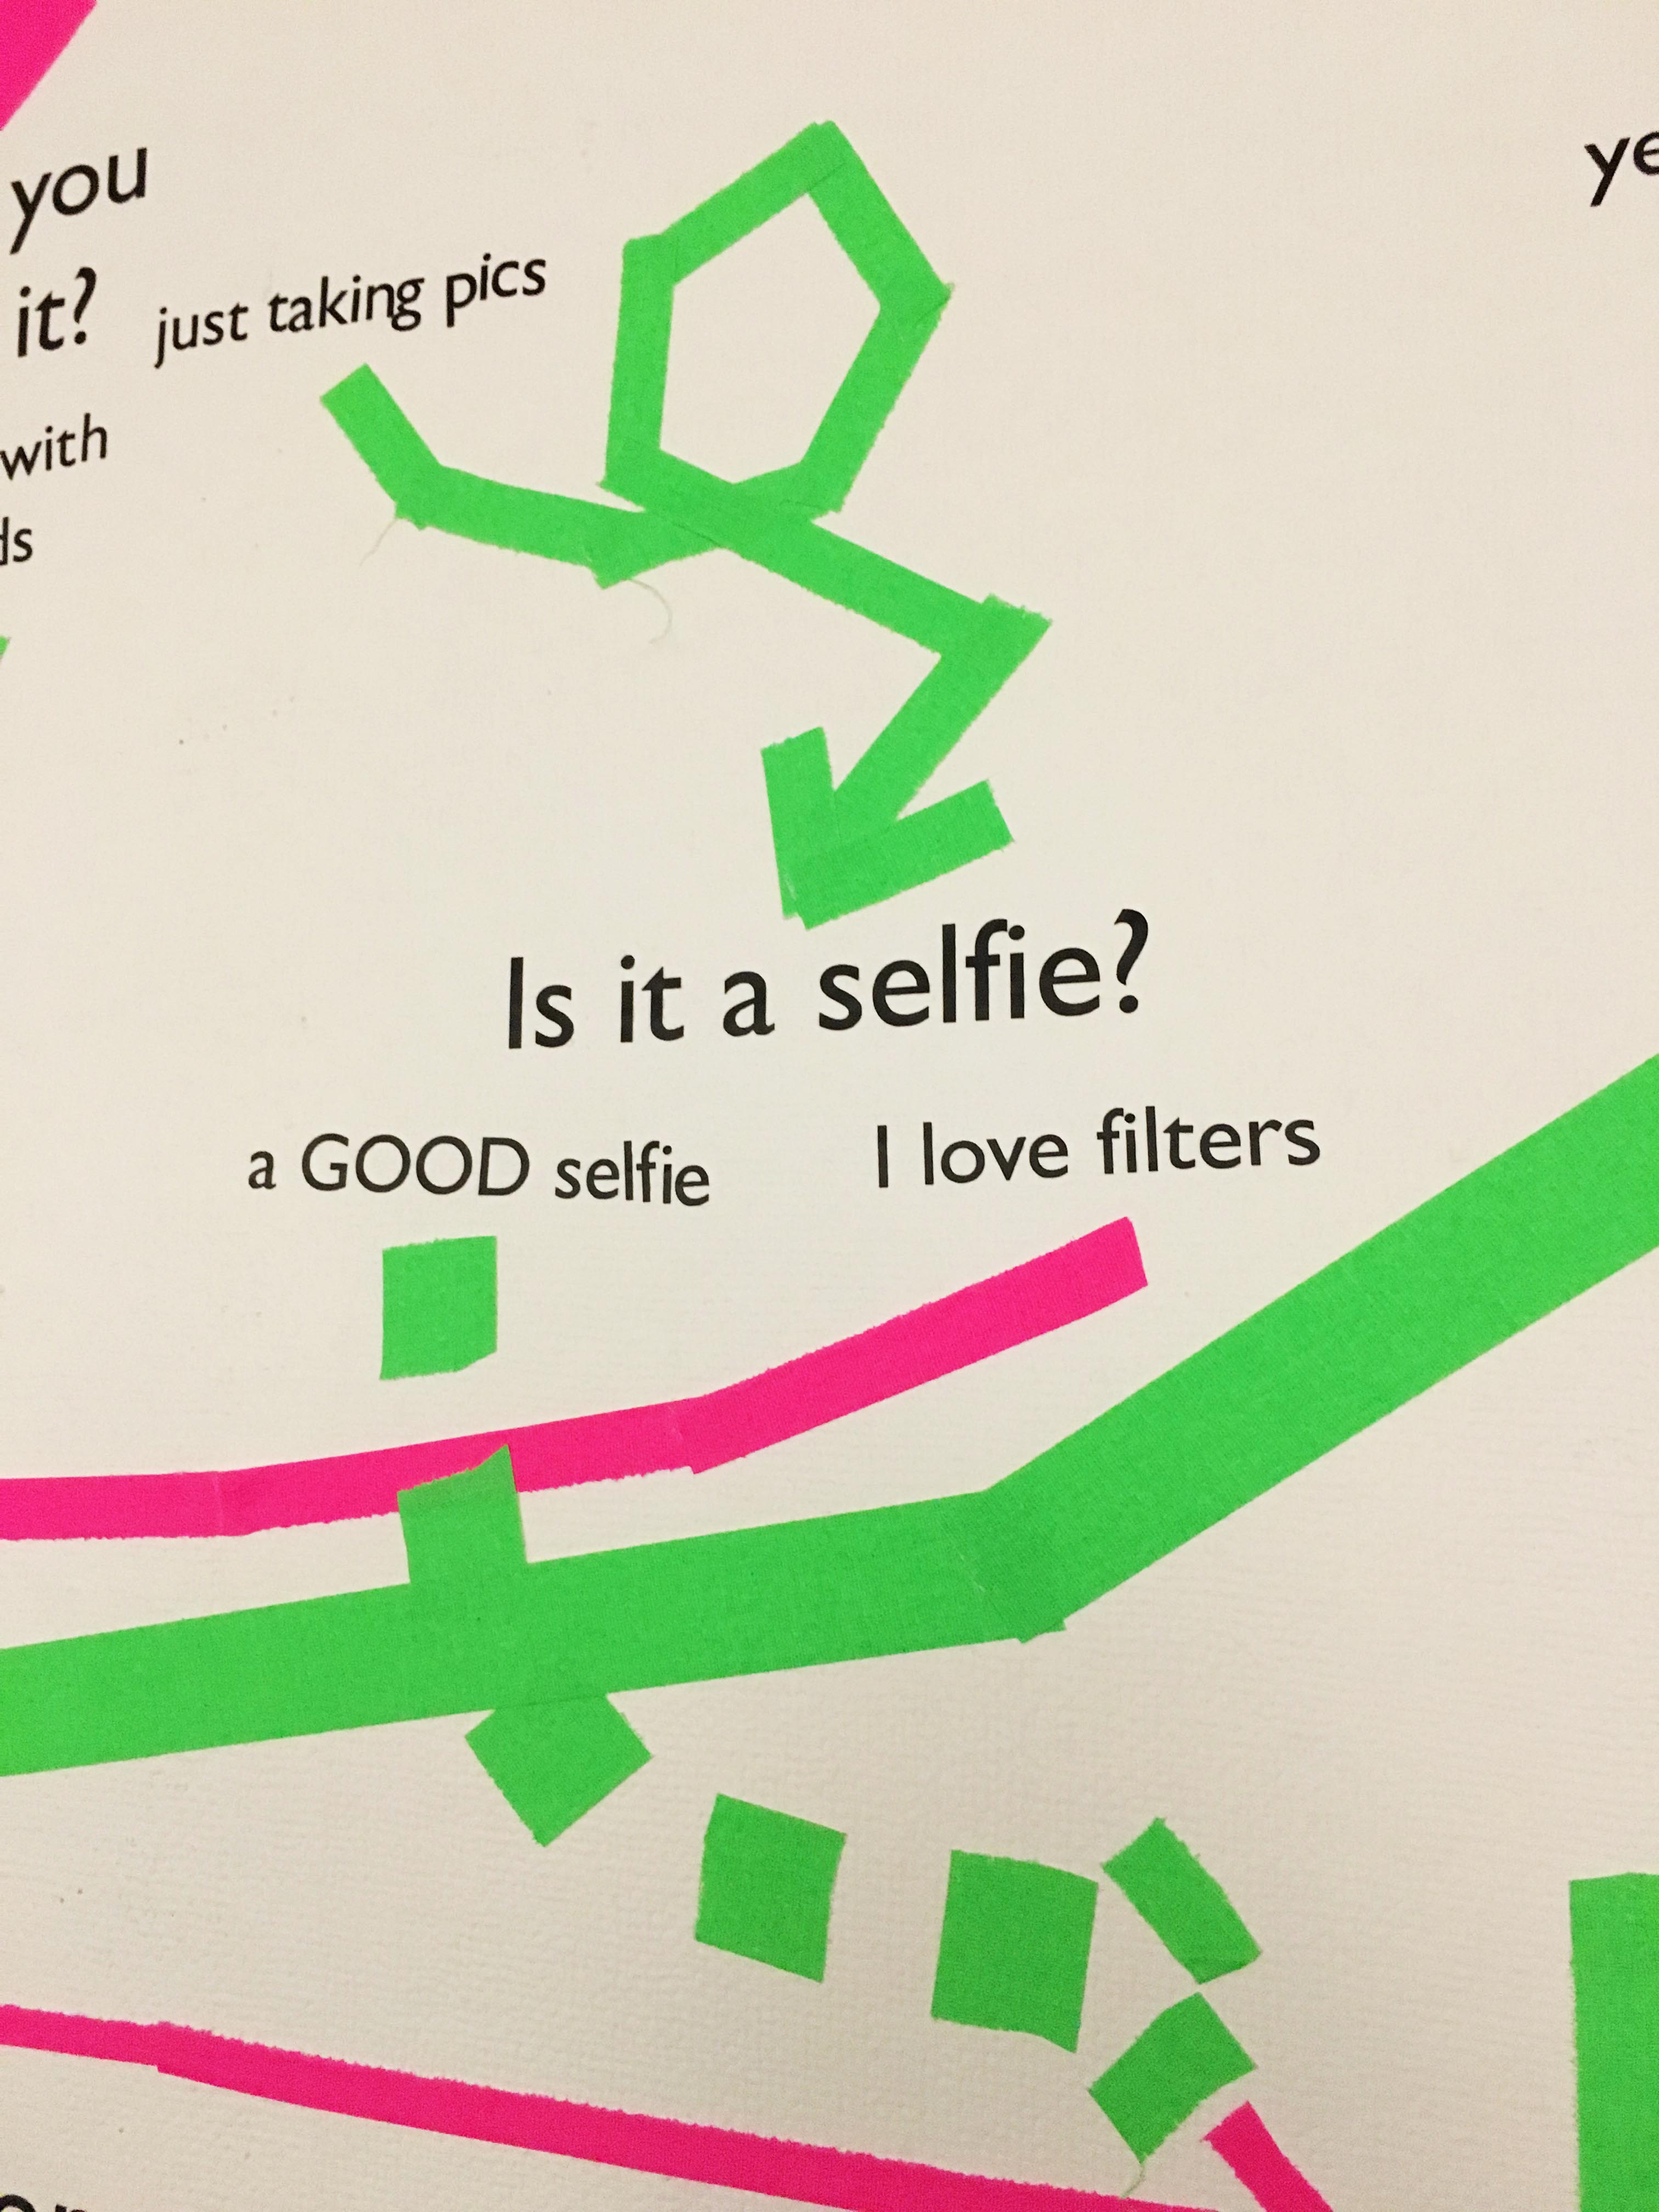 closeup of option reading 'is it a selie?' with options 'a GOOD one' and 'i love filters'